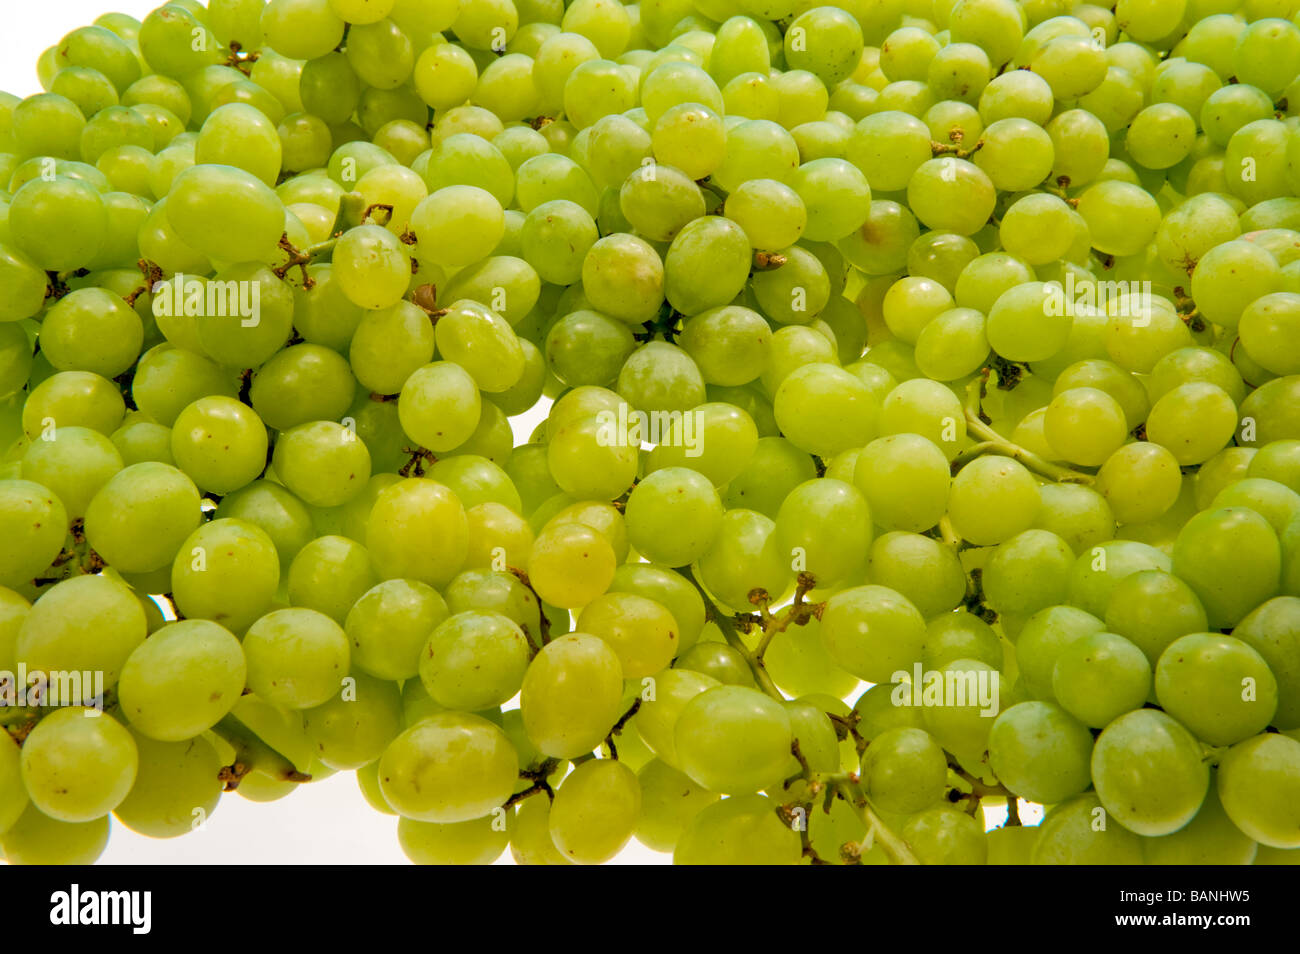 quality seedless table grape food fruit tasty taste healthy health green yellow sweet fresh part of a balanced diet 5 a day  stu Stock Photo